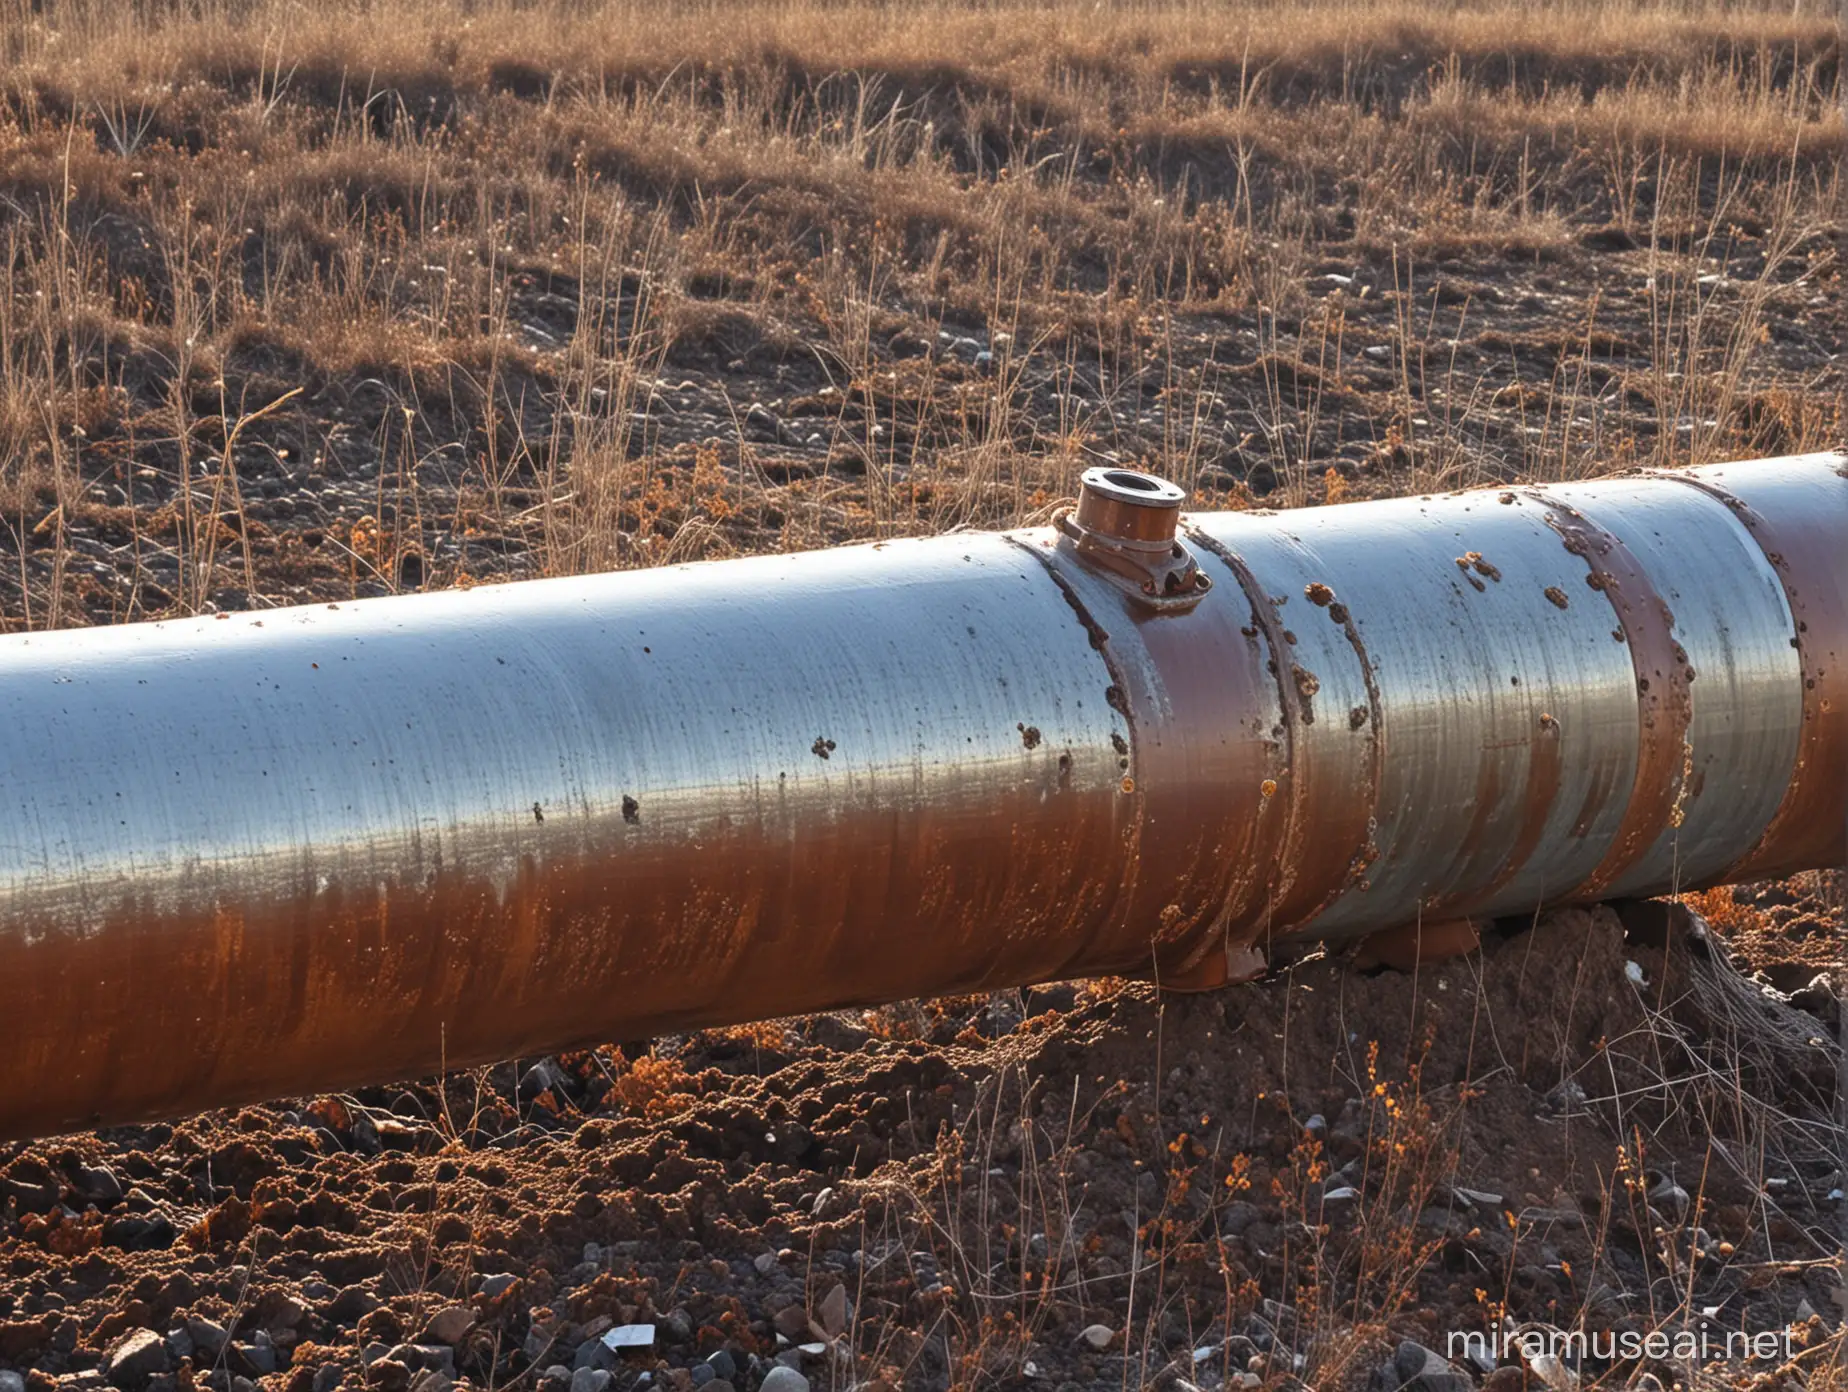 Rustic Pipeline Corrosion A Captivating Photo of Industrial Decay